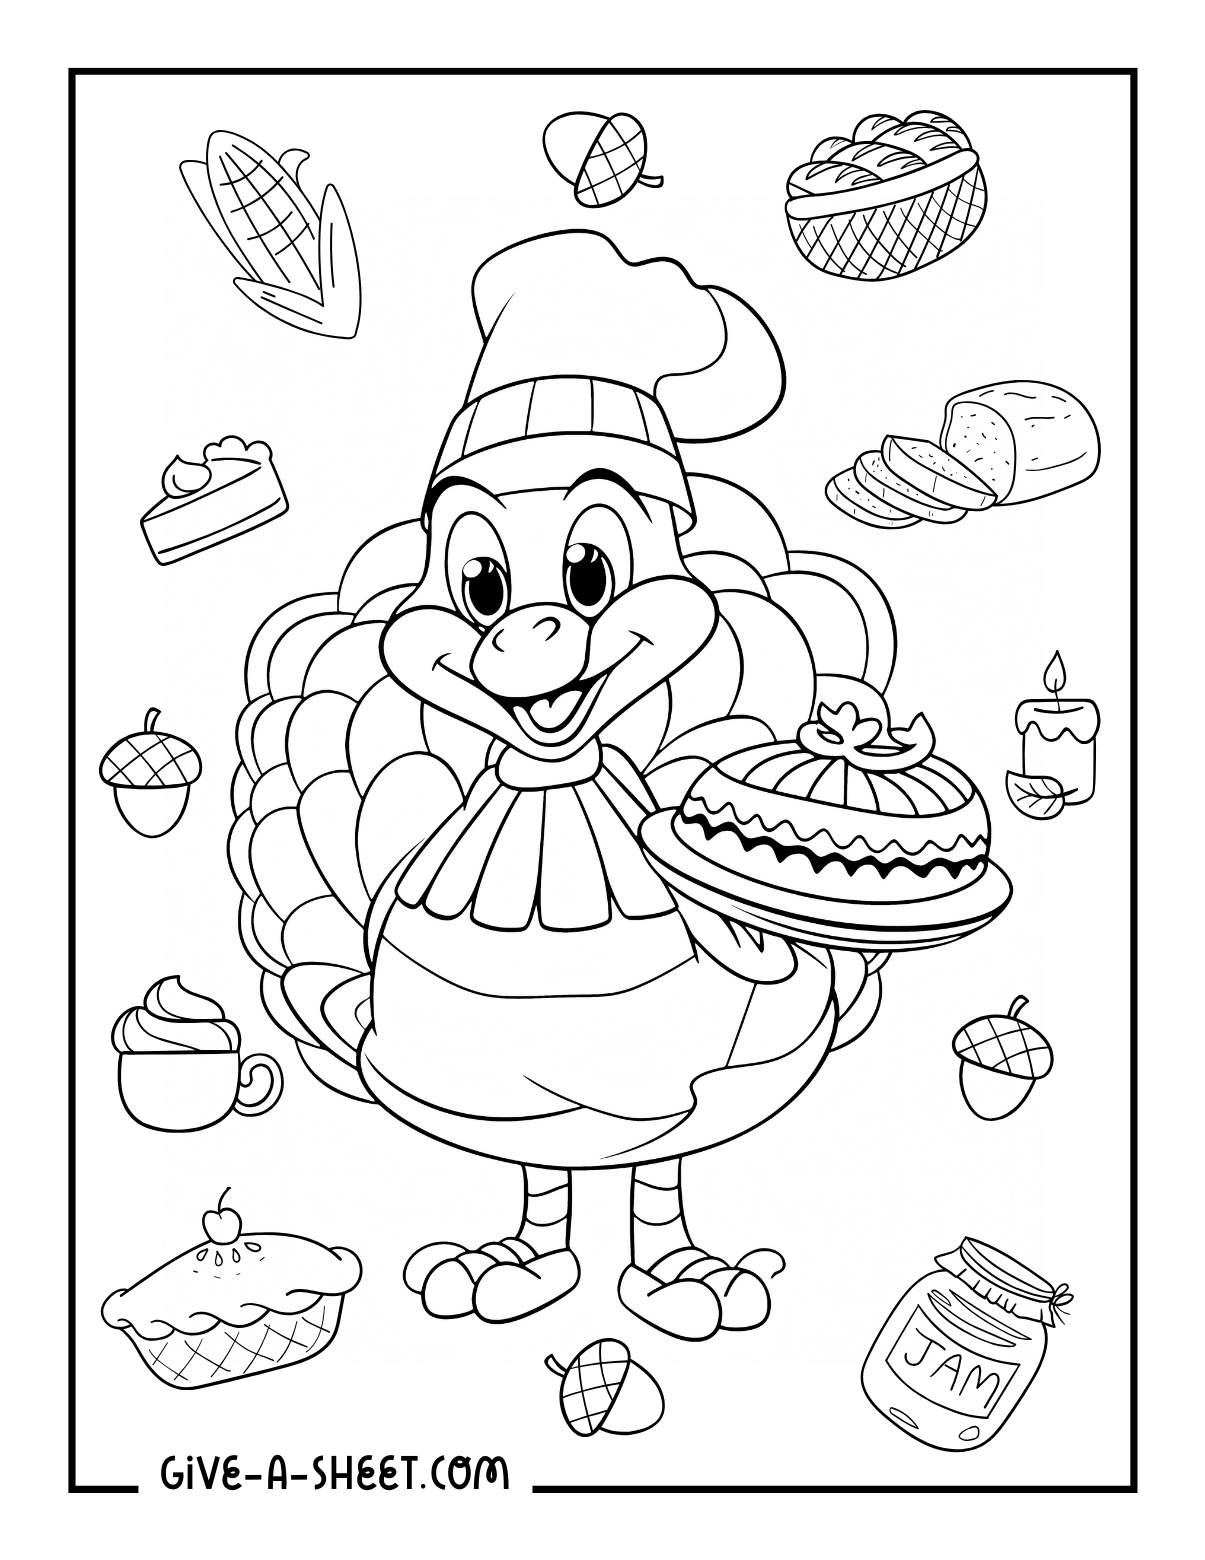 Great thanksgiving coloring pages dinner table with turkey.